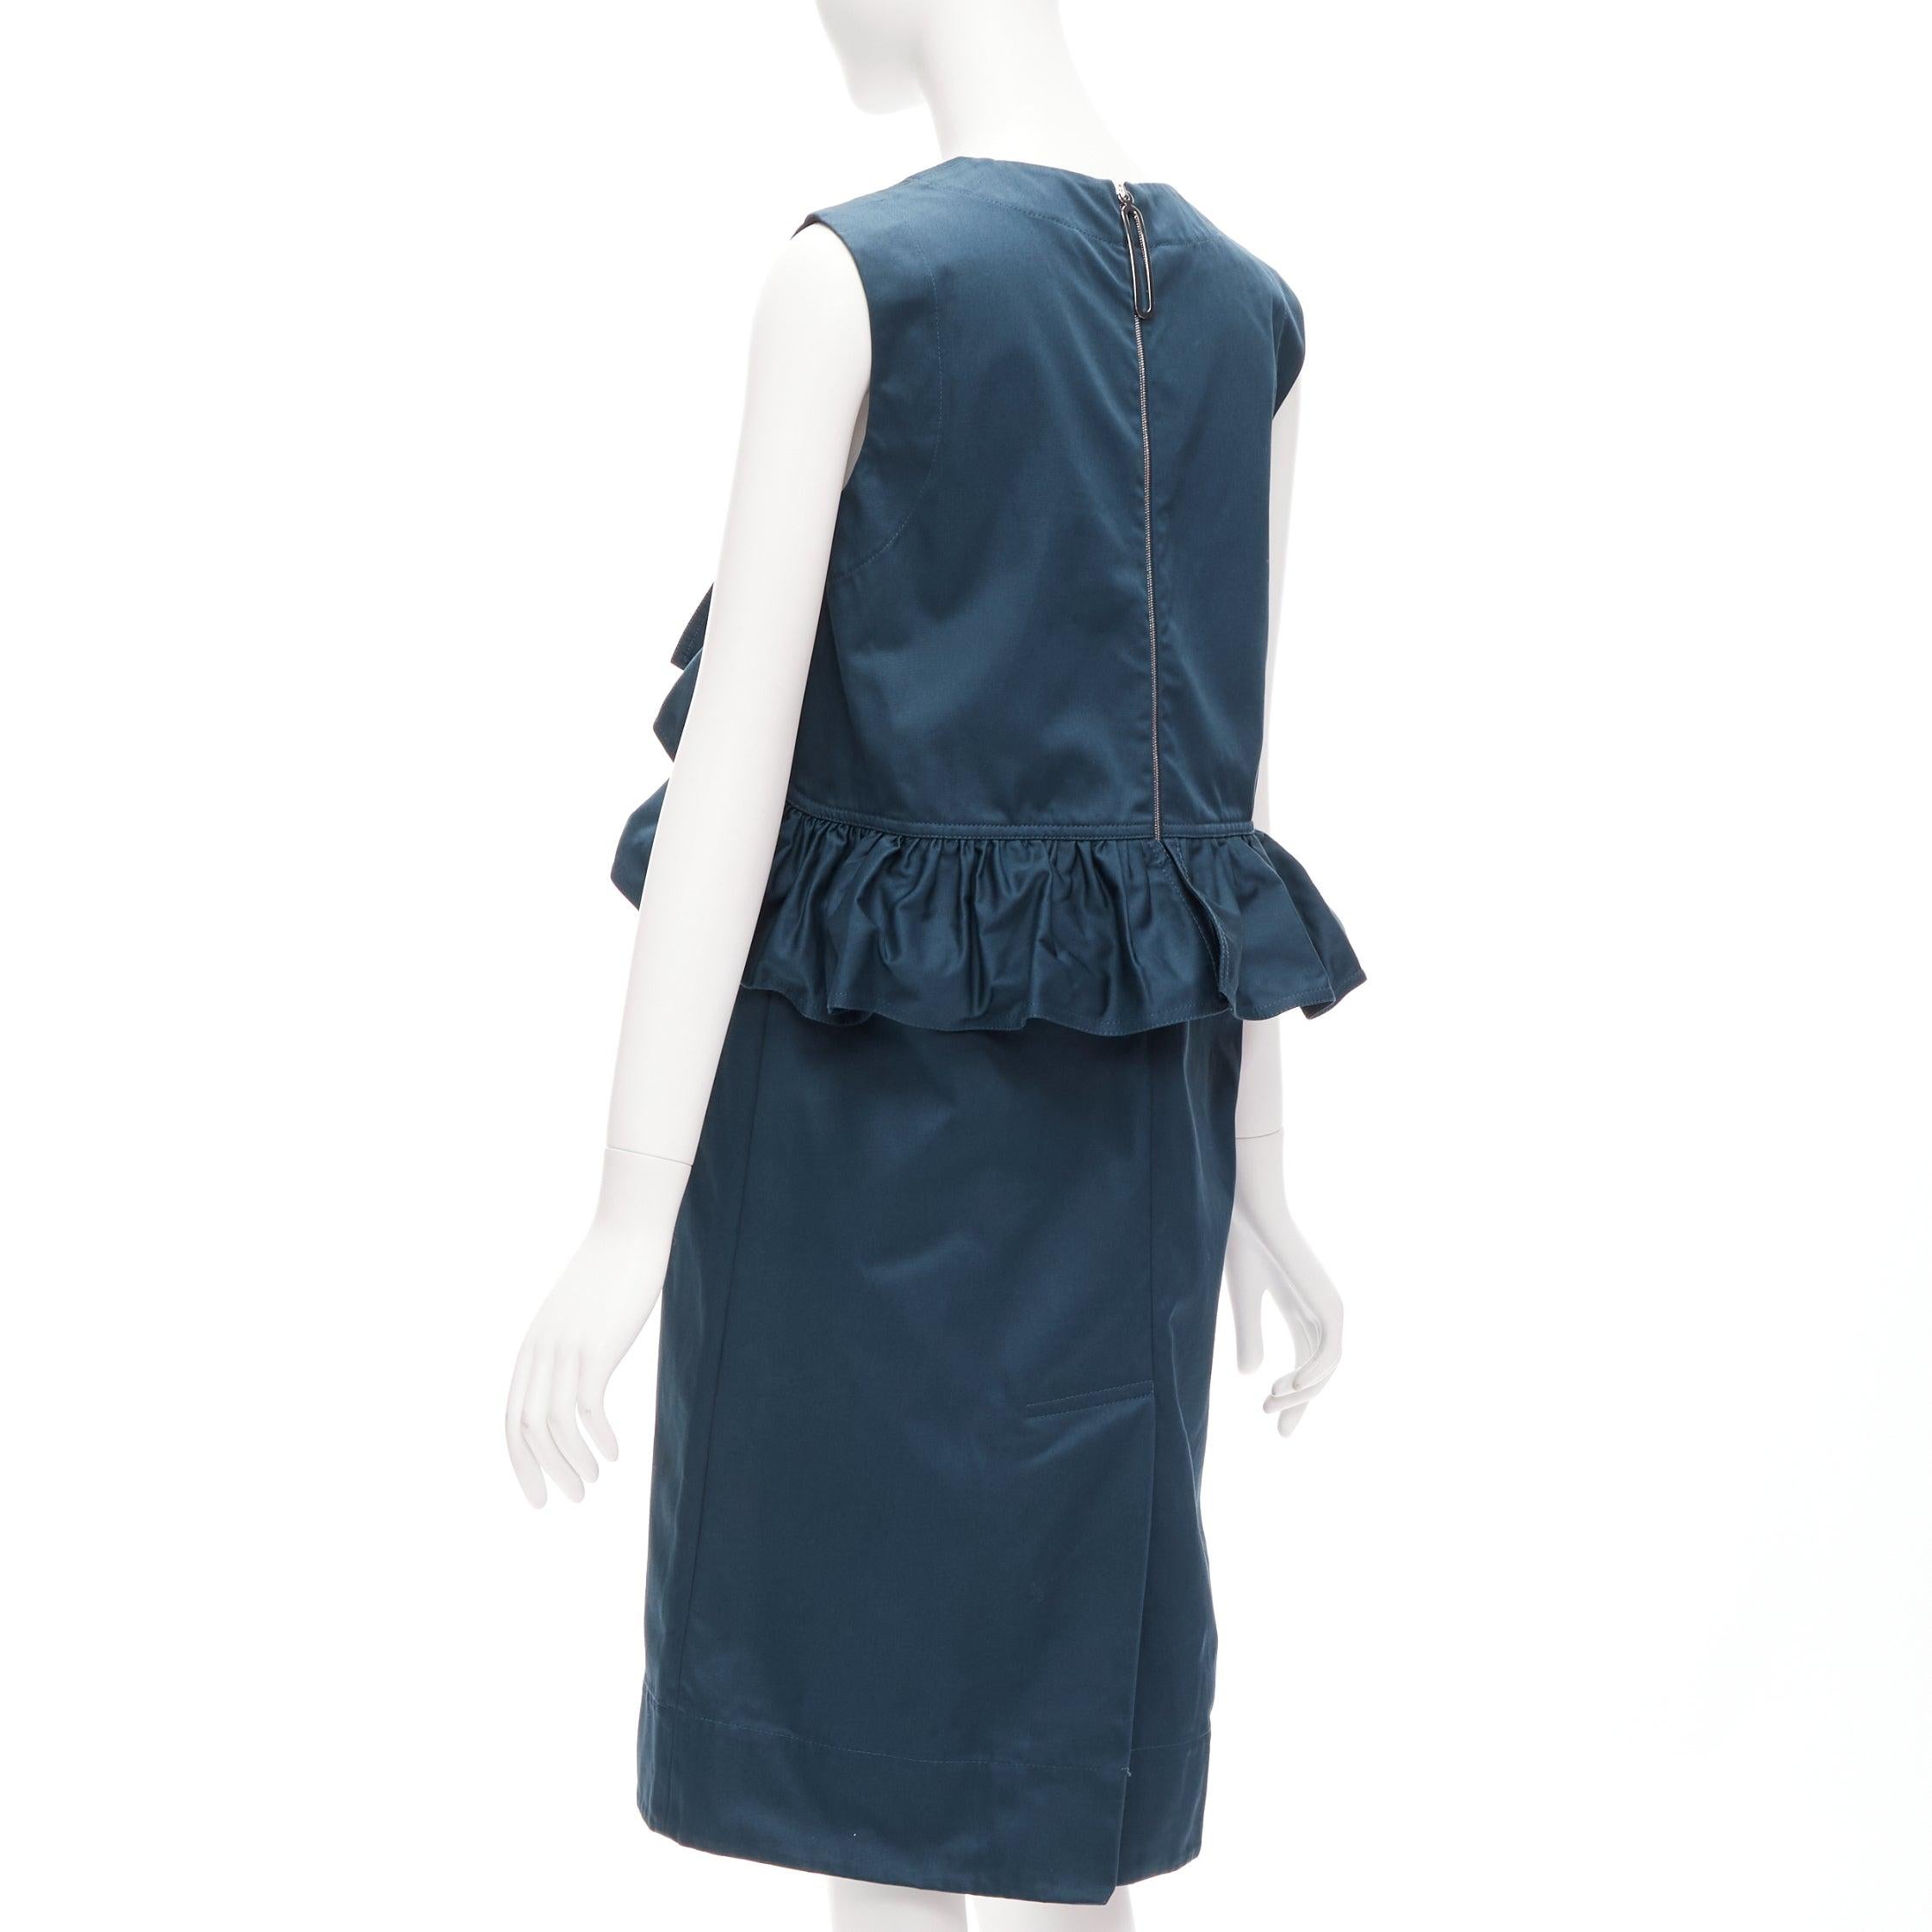 MARNI teal blue ruffle waist round neck cocktail dress IT38 XS For Sale 1